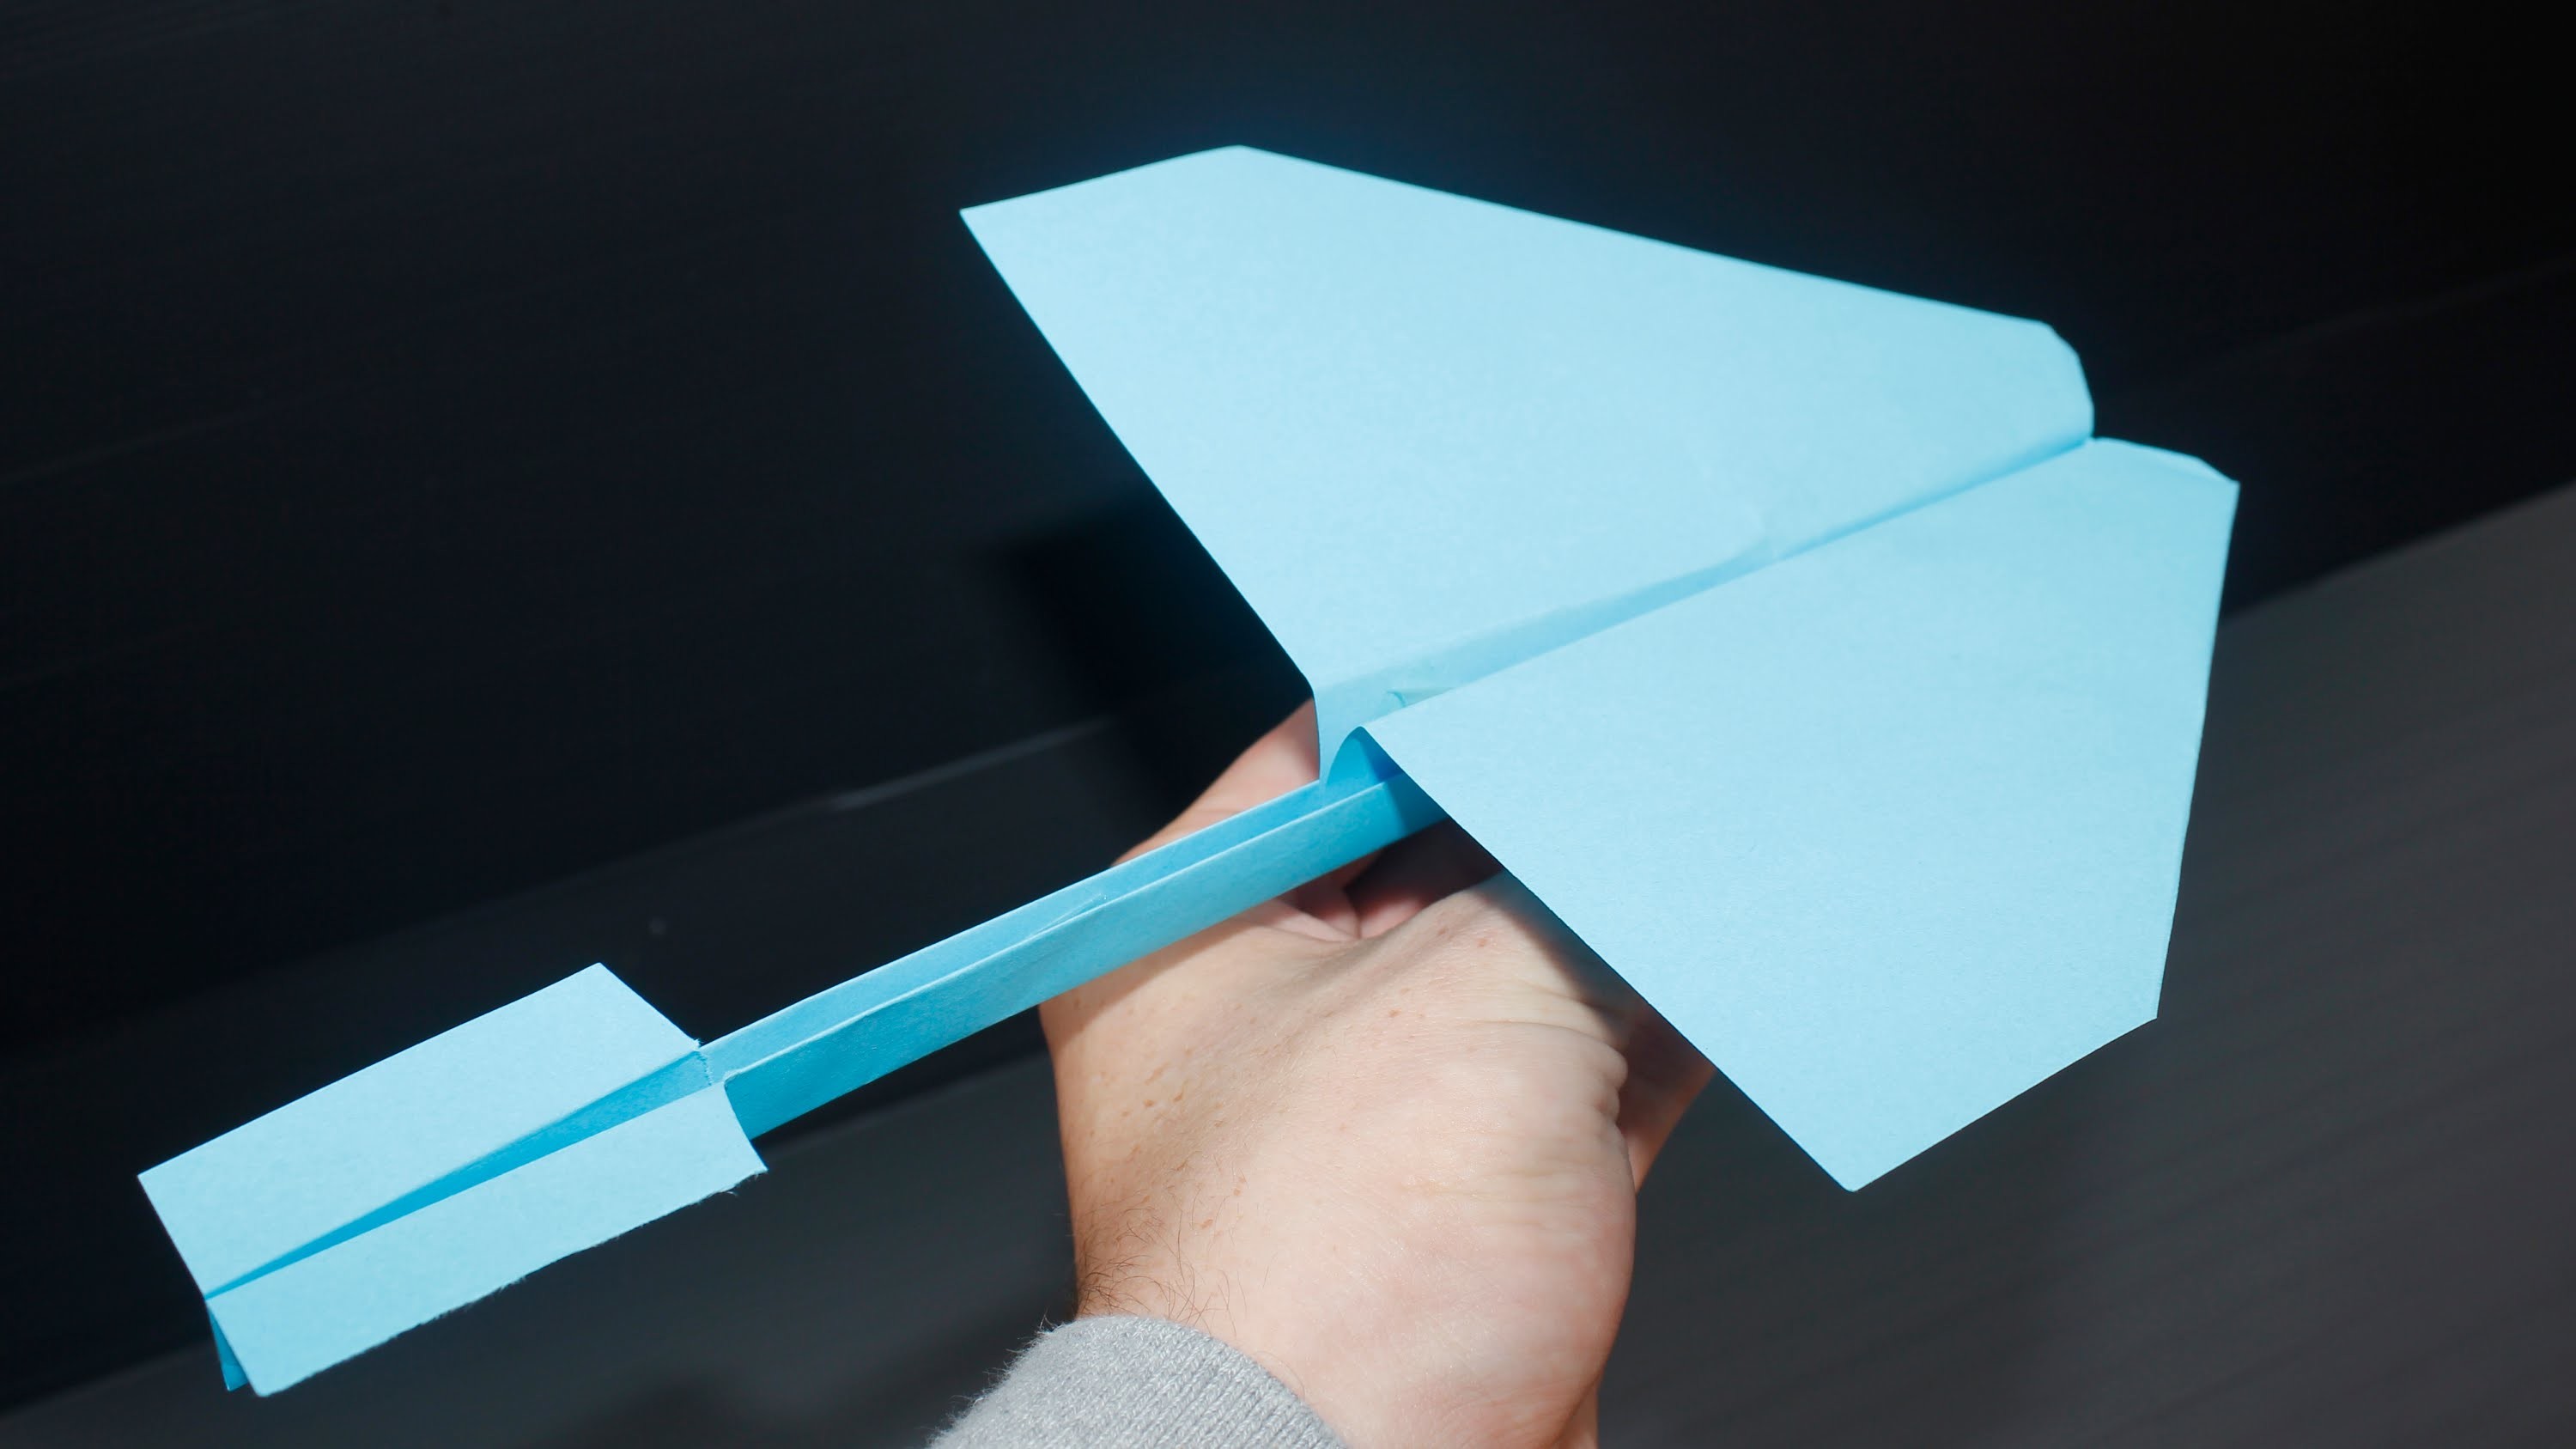 how to make an awesome paper airplane that flies far